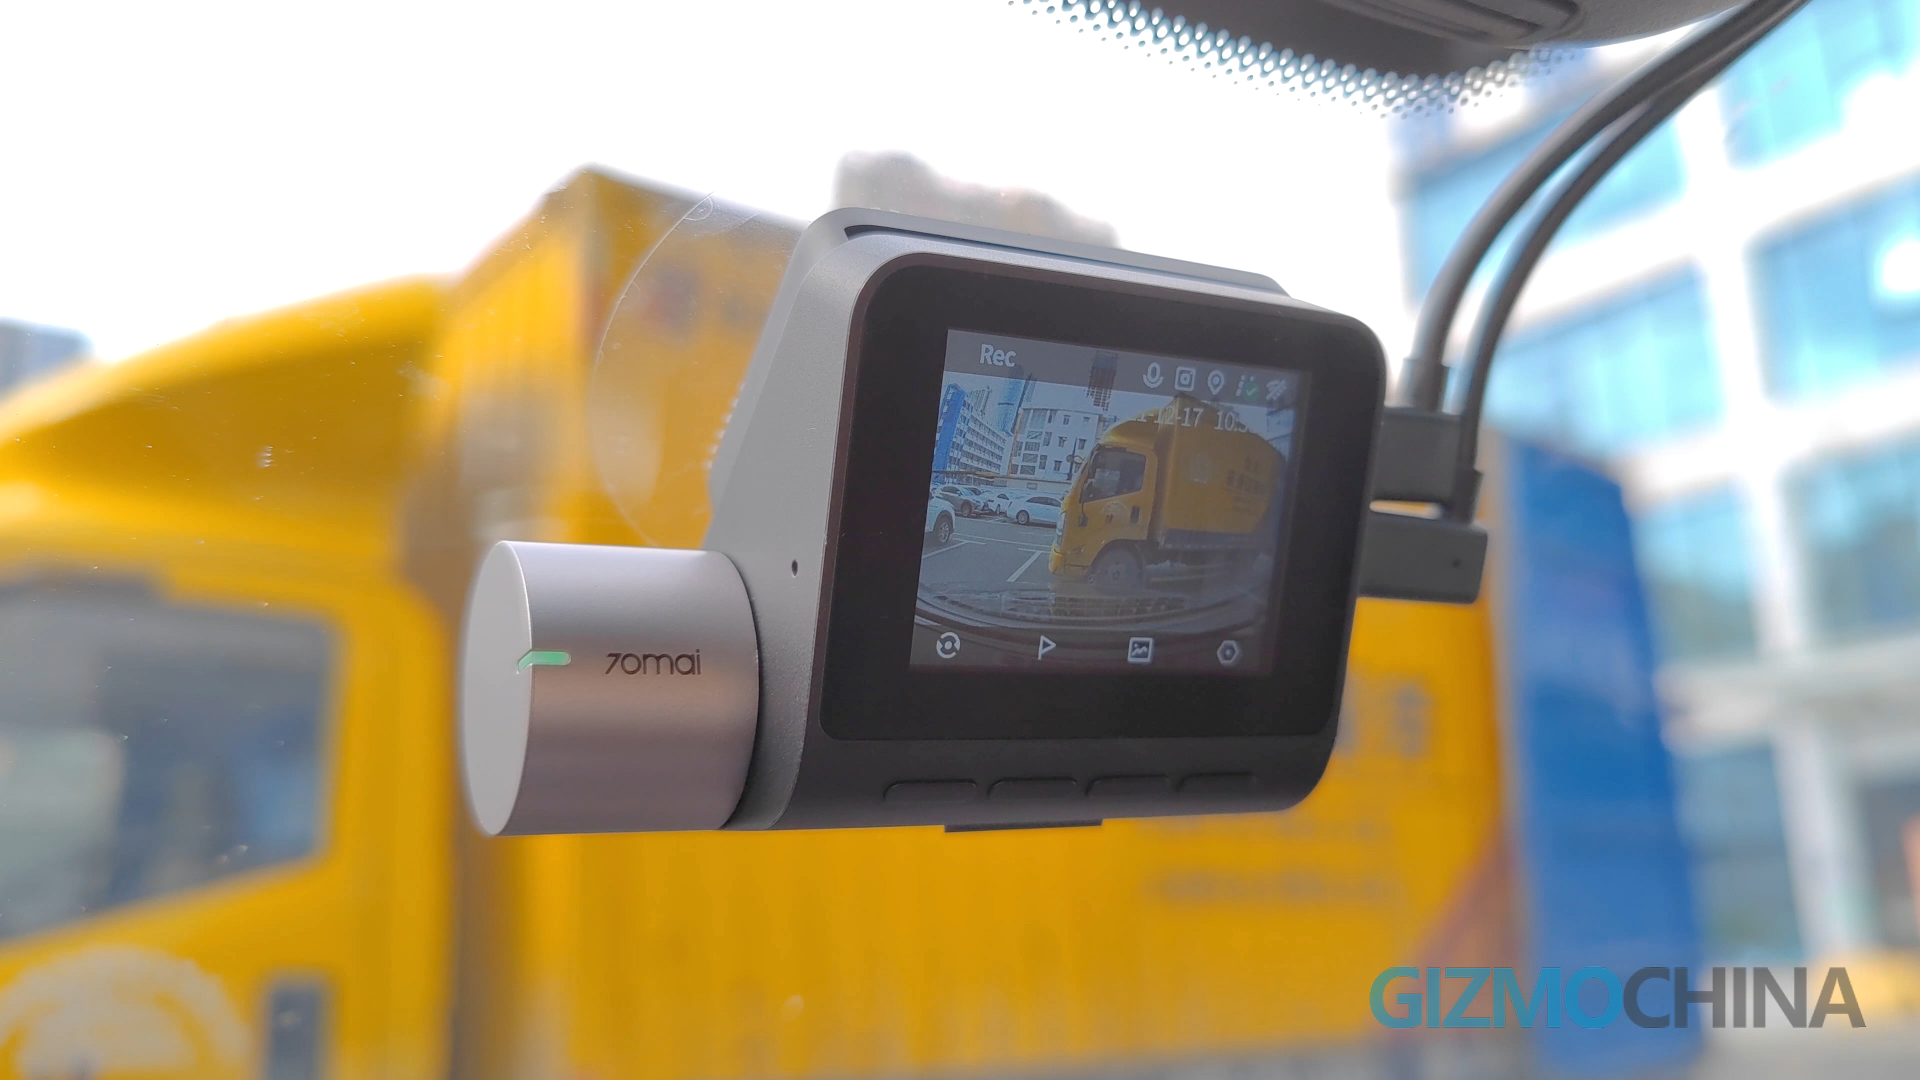 https://www.gizmochina.com/wp-content/uploads/2021/12/70mai-Dash-Cam-Pro-Plus-Review-in-action-.png